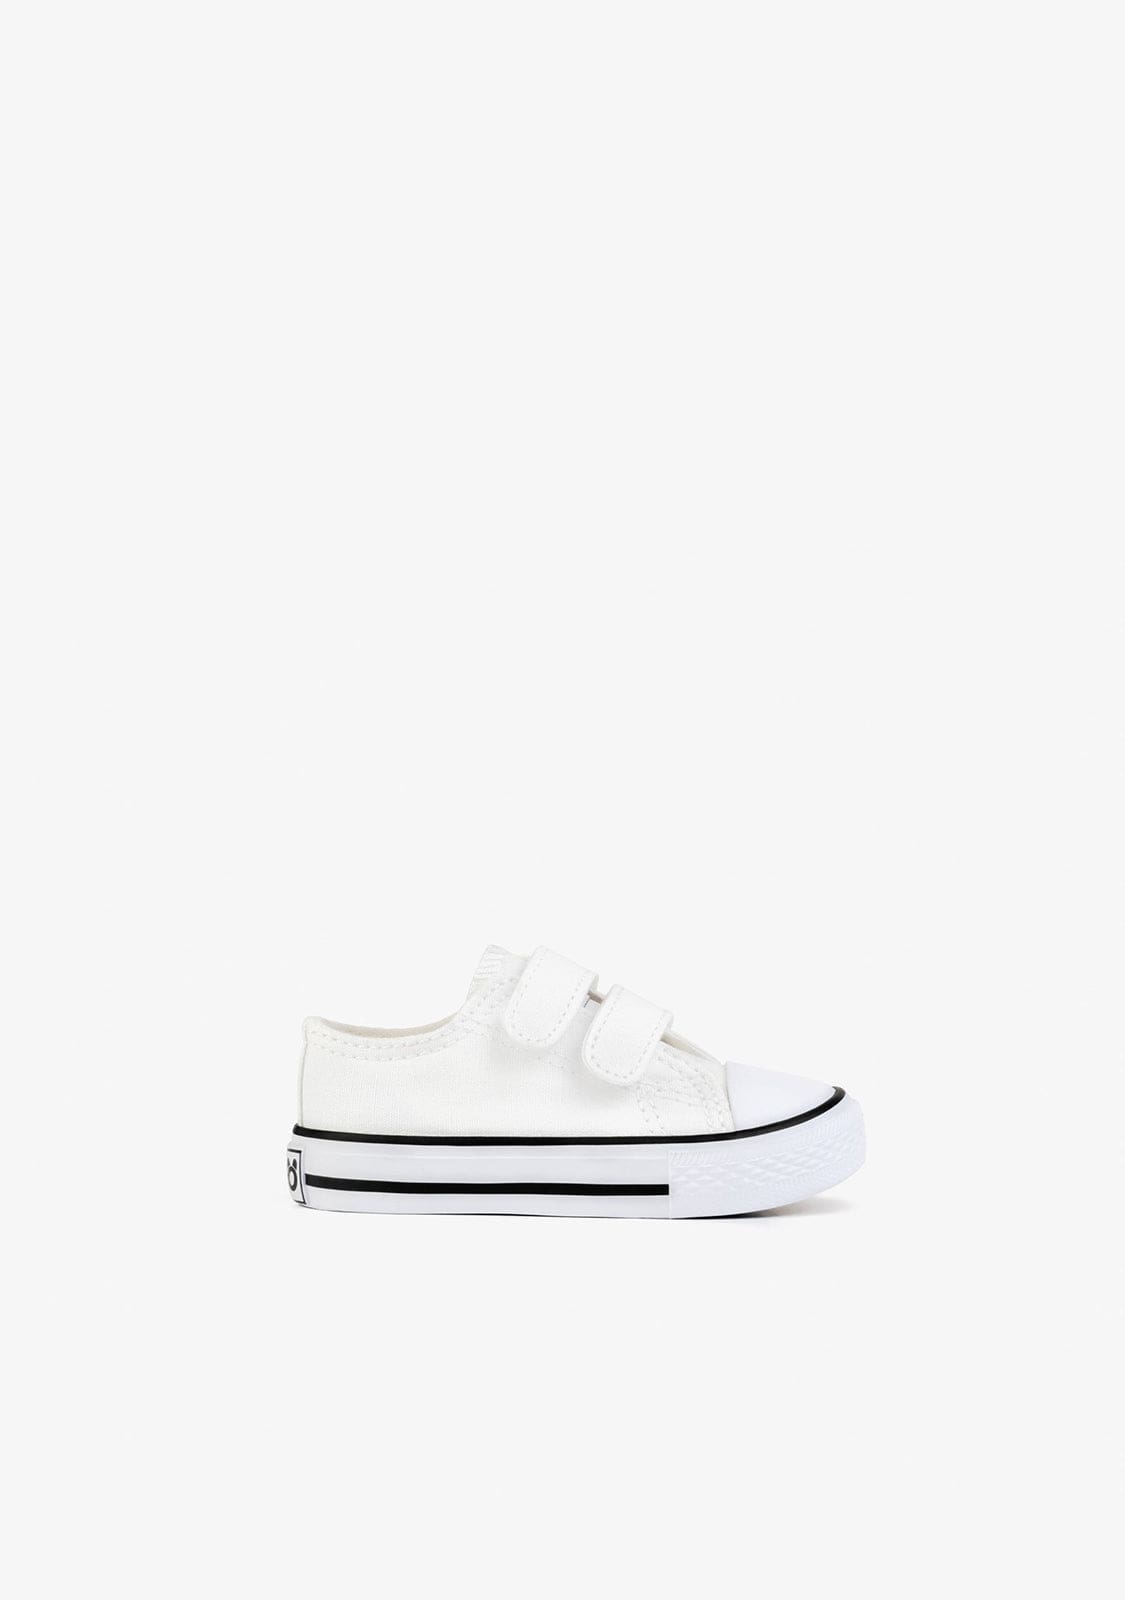 OSITO Shoes Baby's White Basic Sneakers Canvas